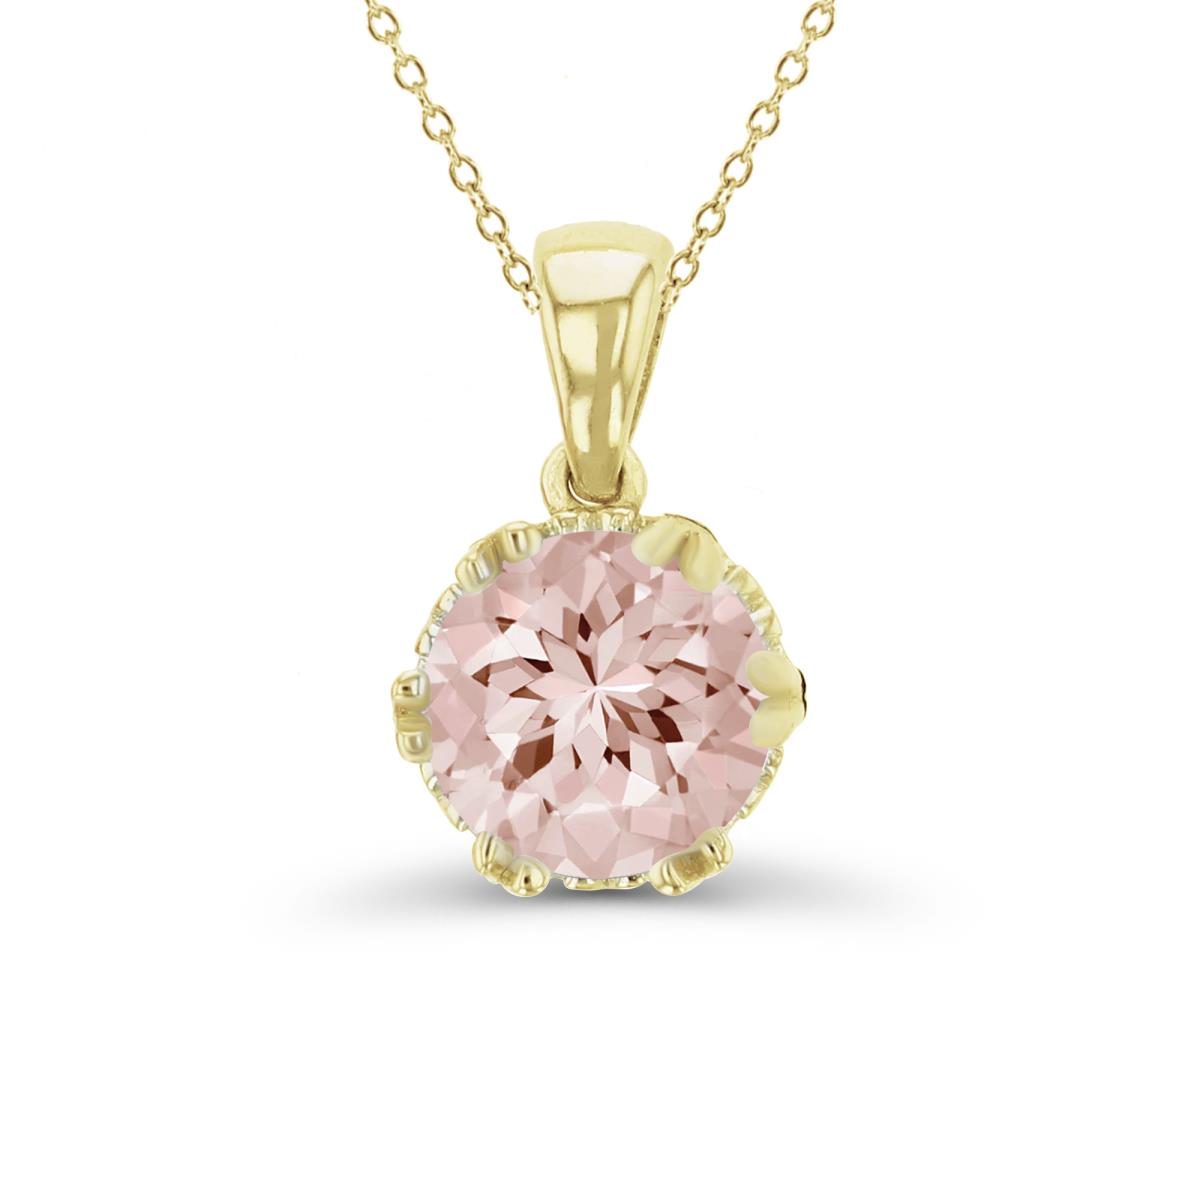 14K Yellow Gold 8mm Round Cut Morganite Nano Solitaire 18" Necklace